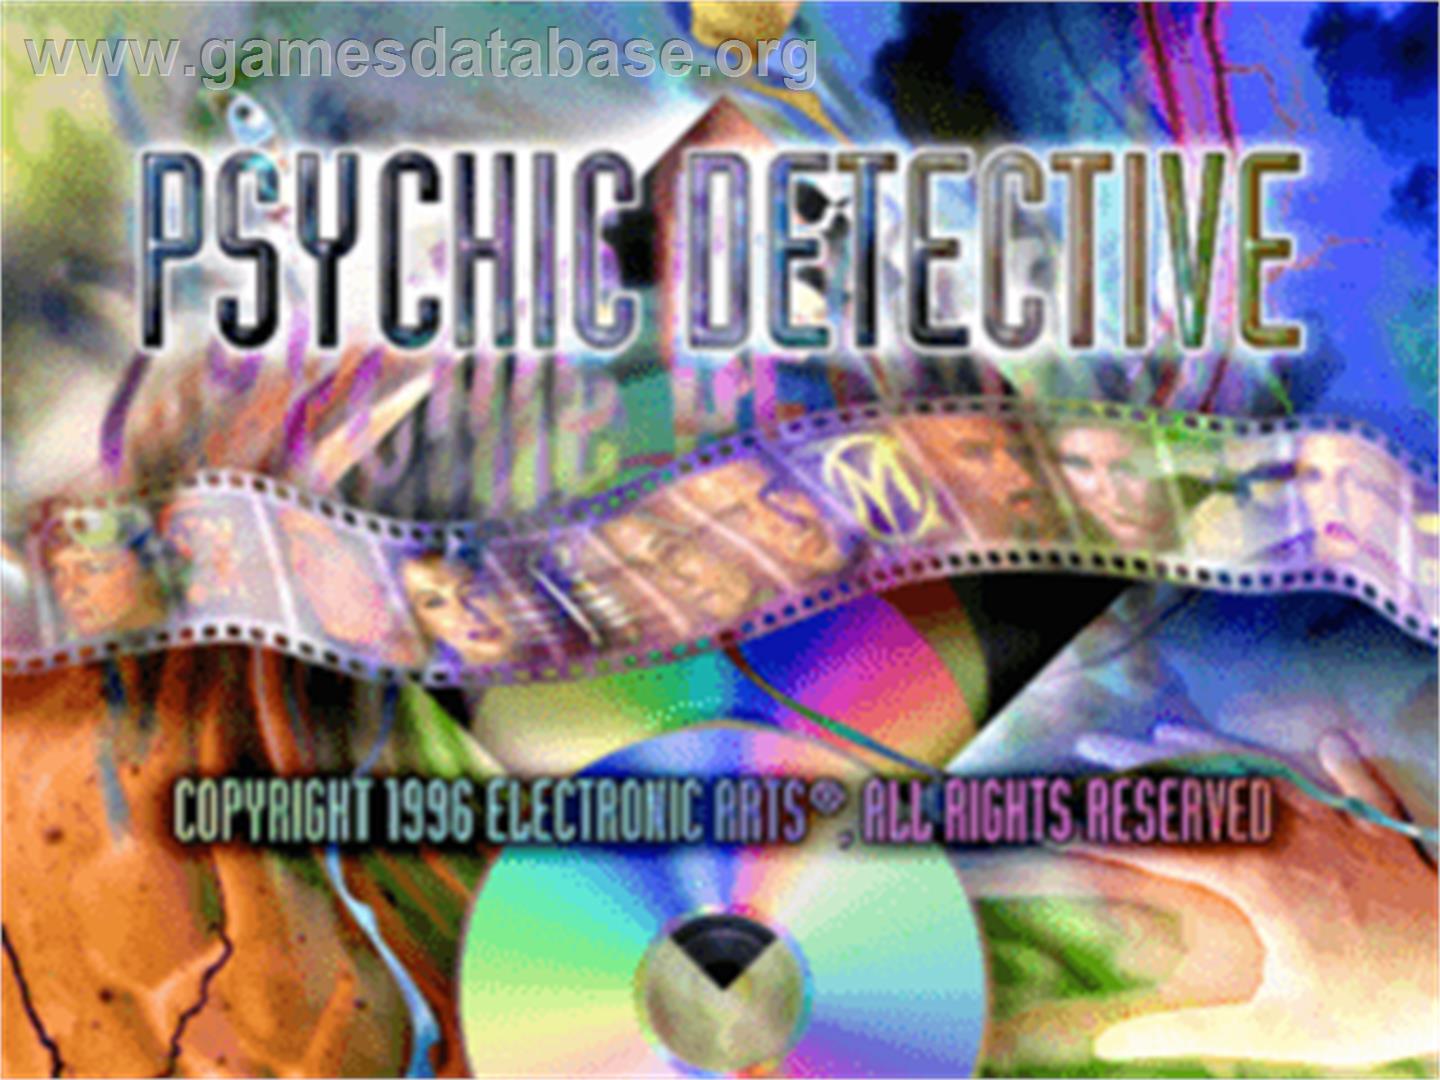 Psychic Detective - Sony Playstation - Artwork - Title Screen